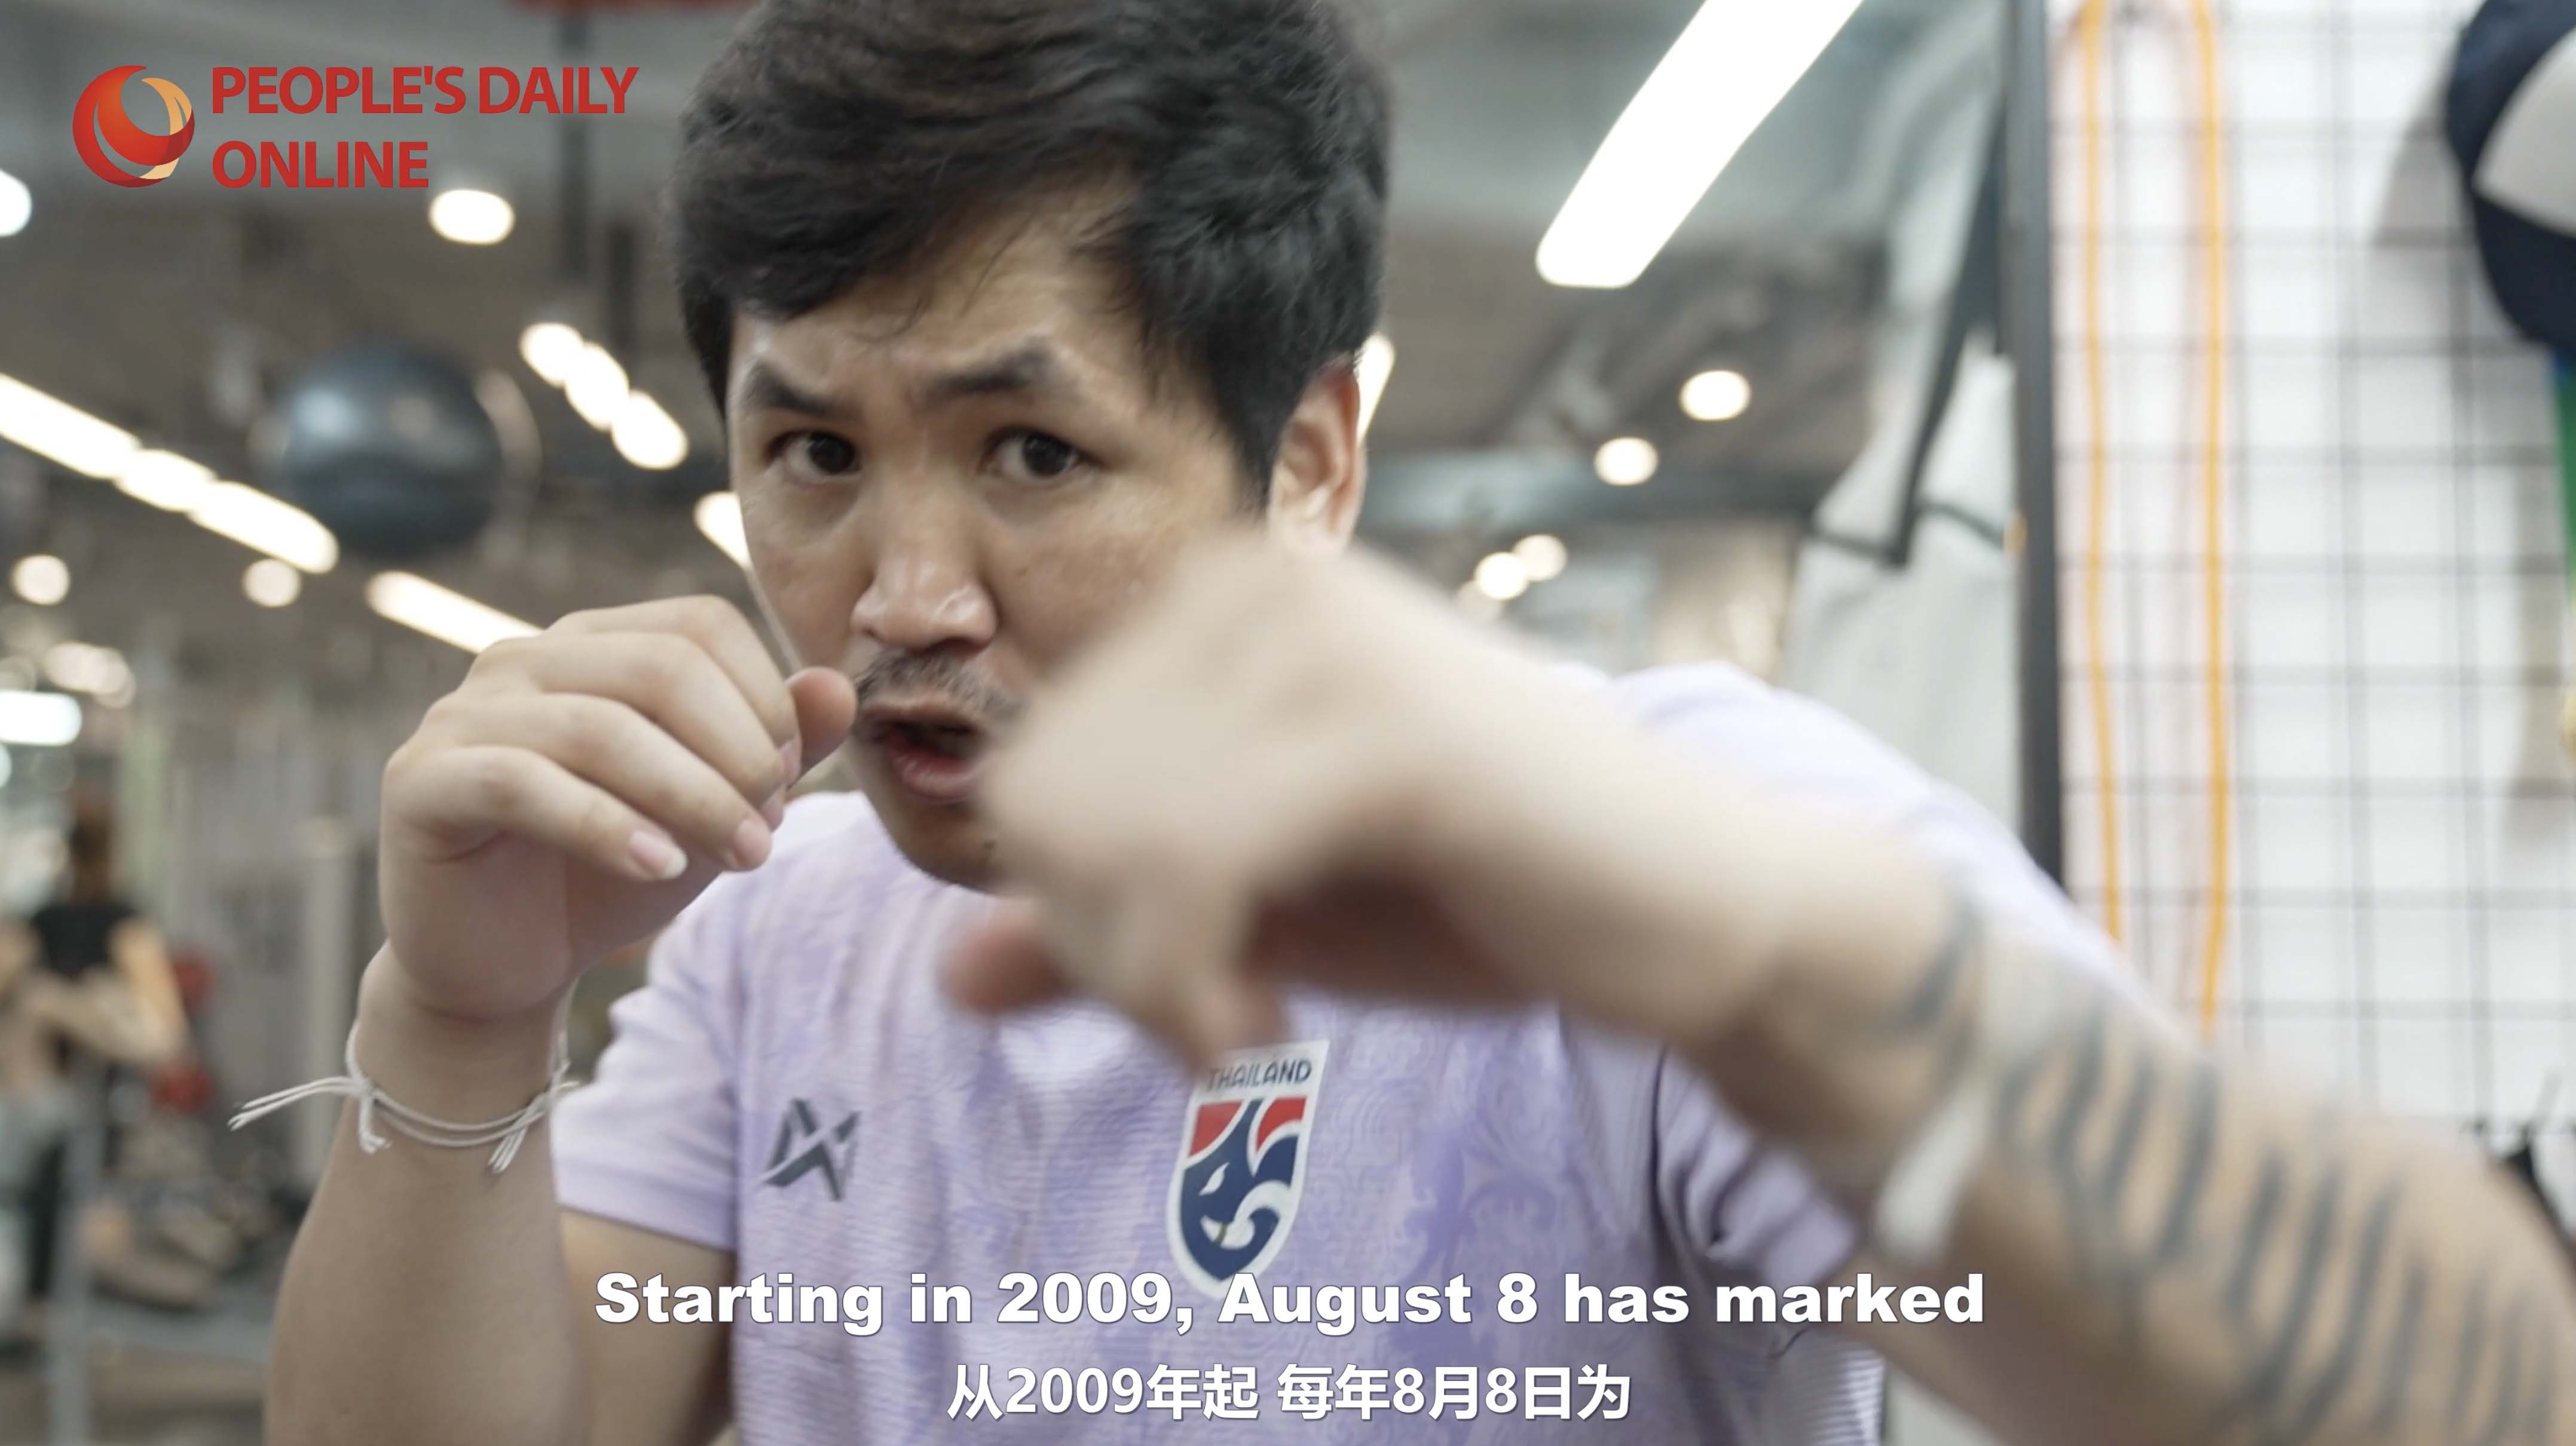 National Fitness Day: Muay Thai